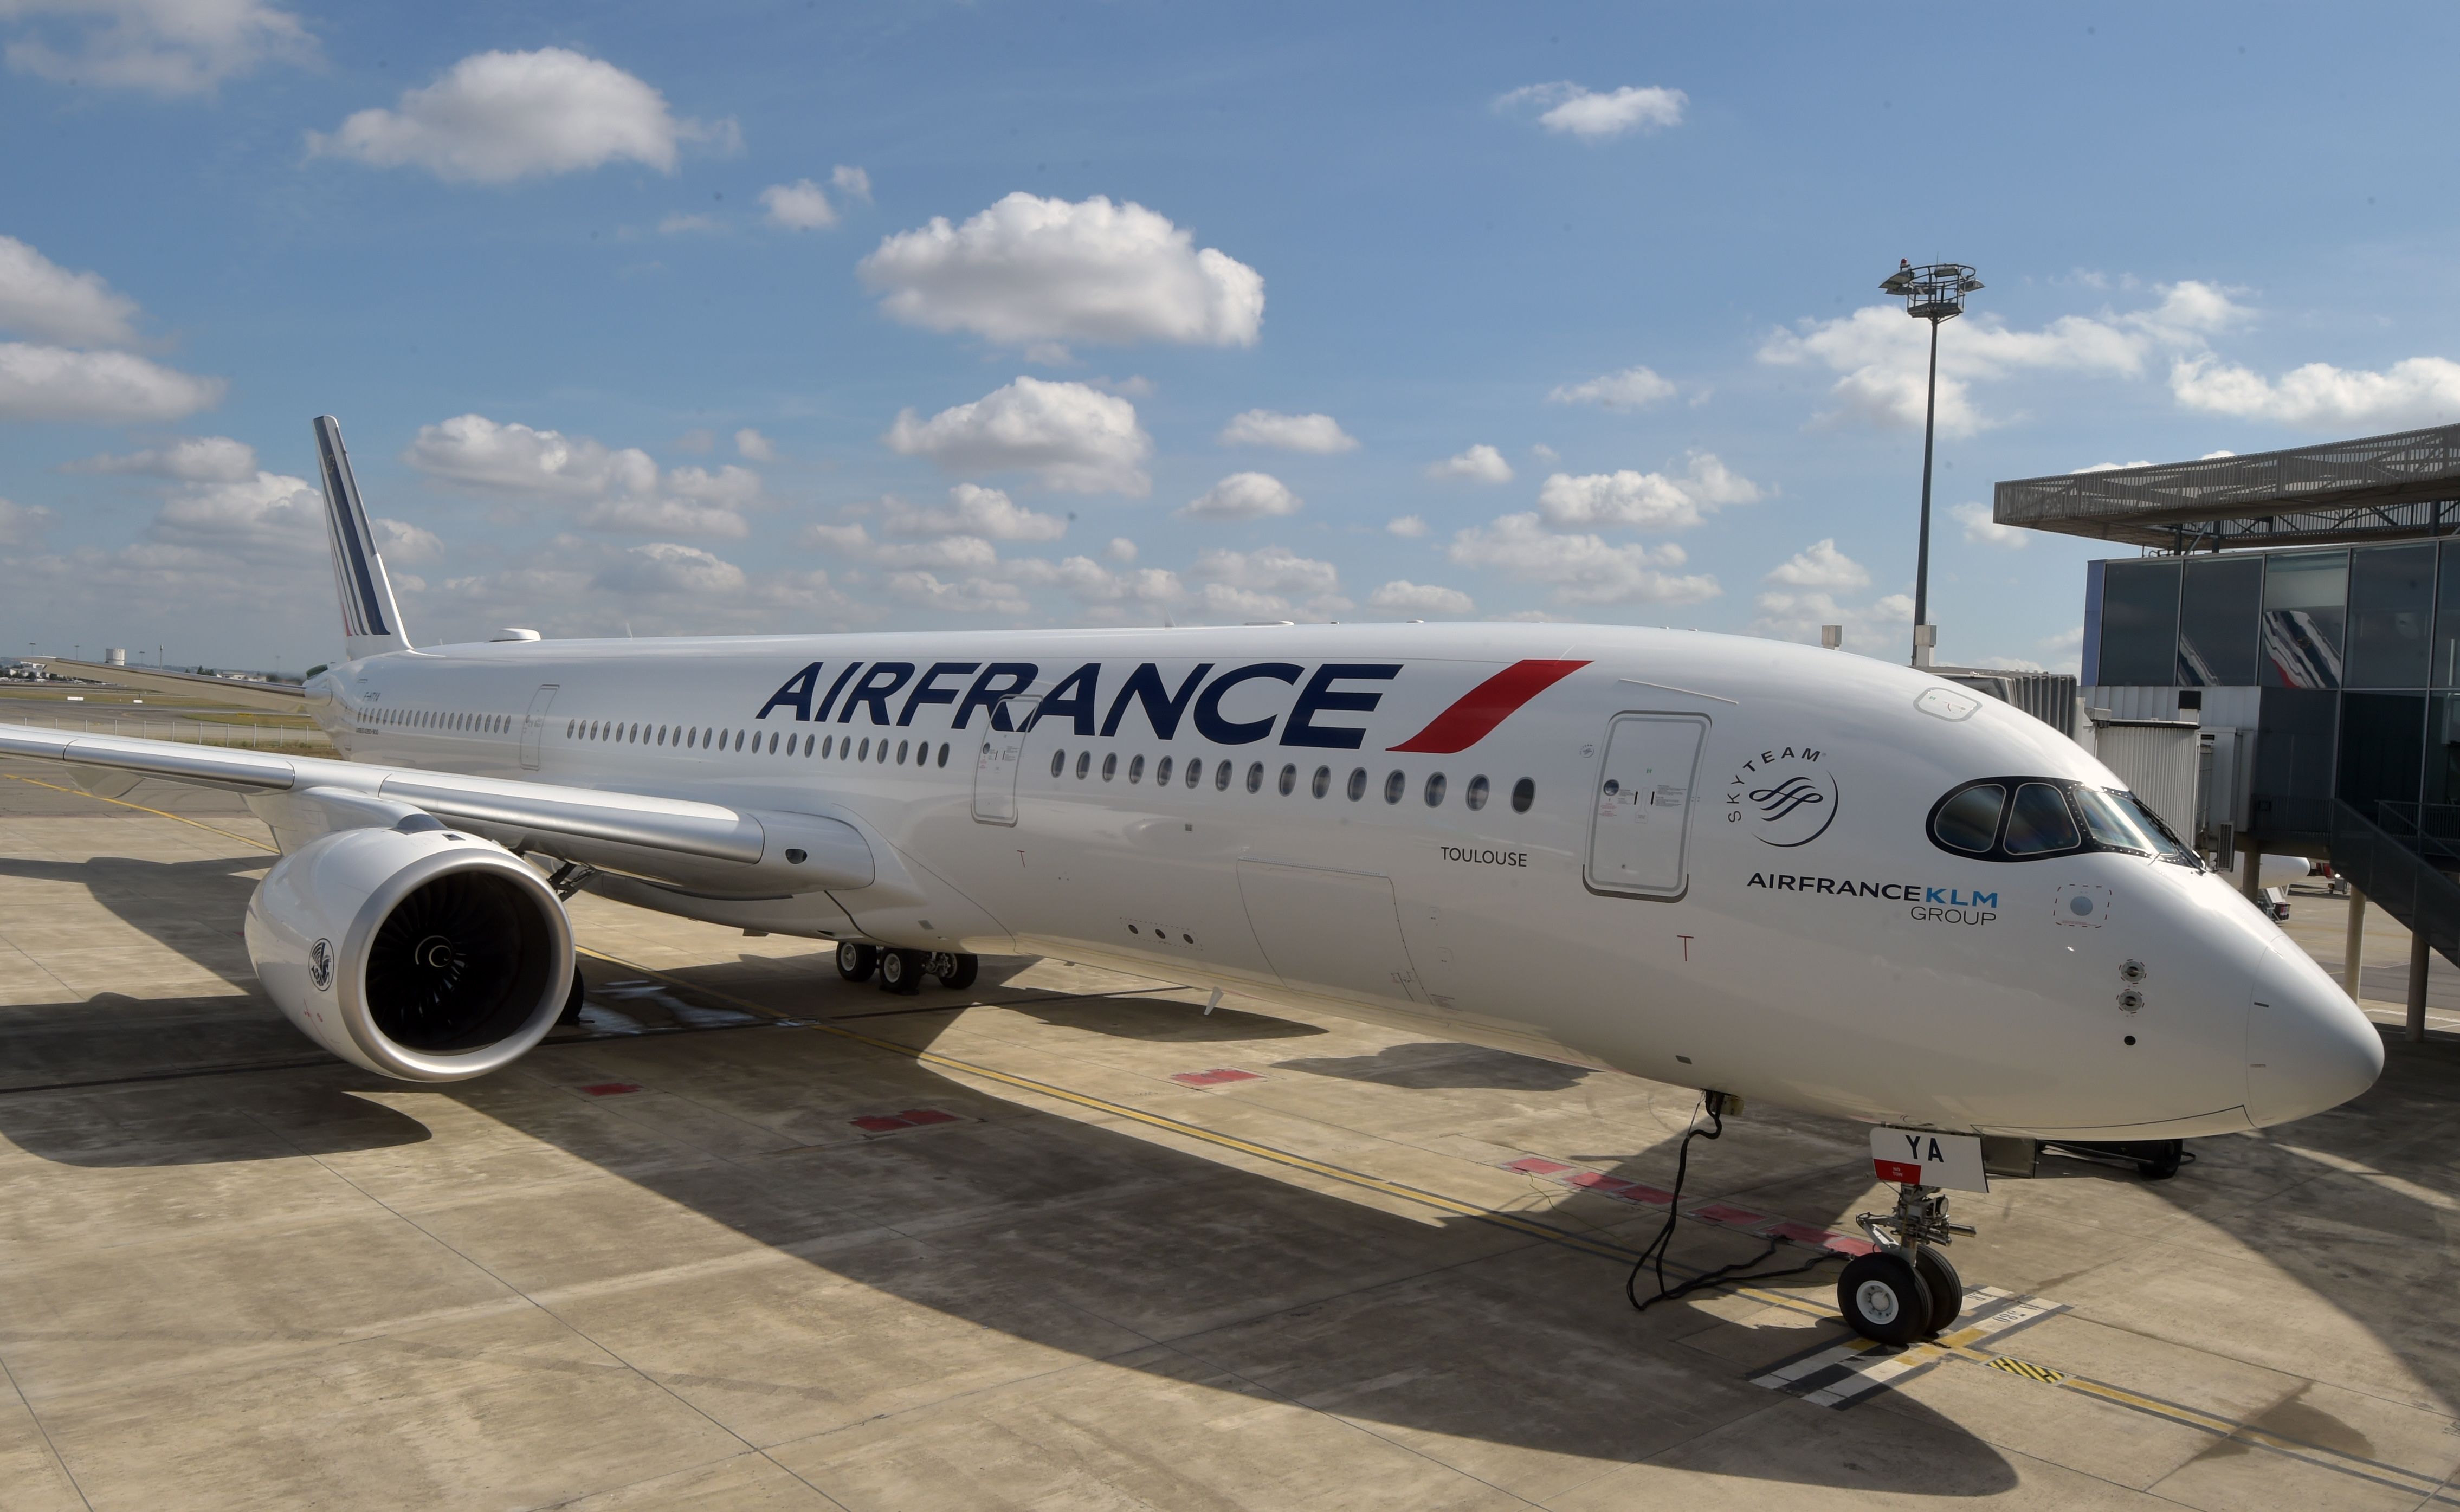 Air France has welcomed its 20th Airbus A350 to its fleet